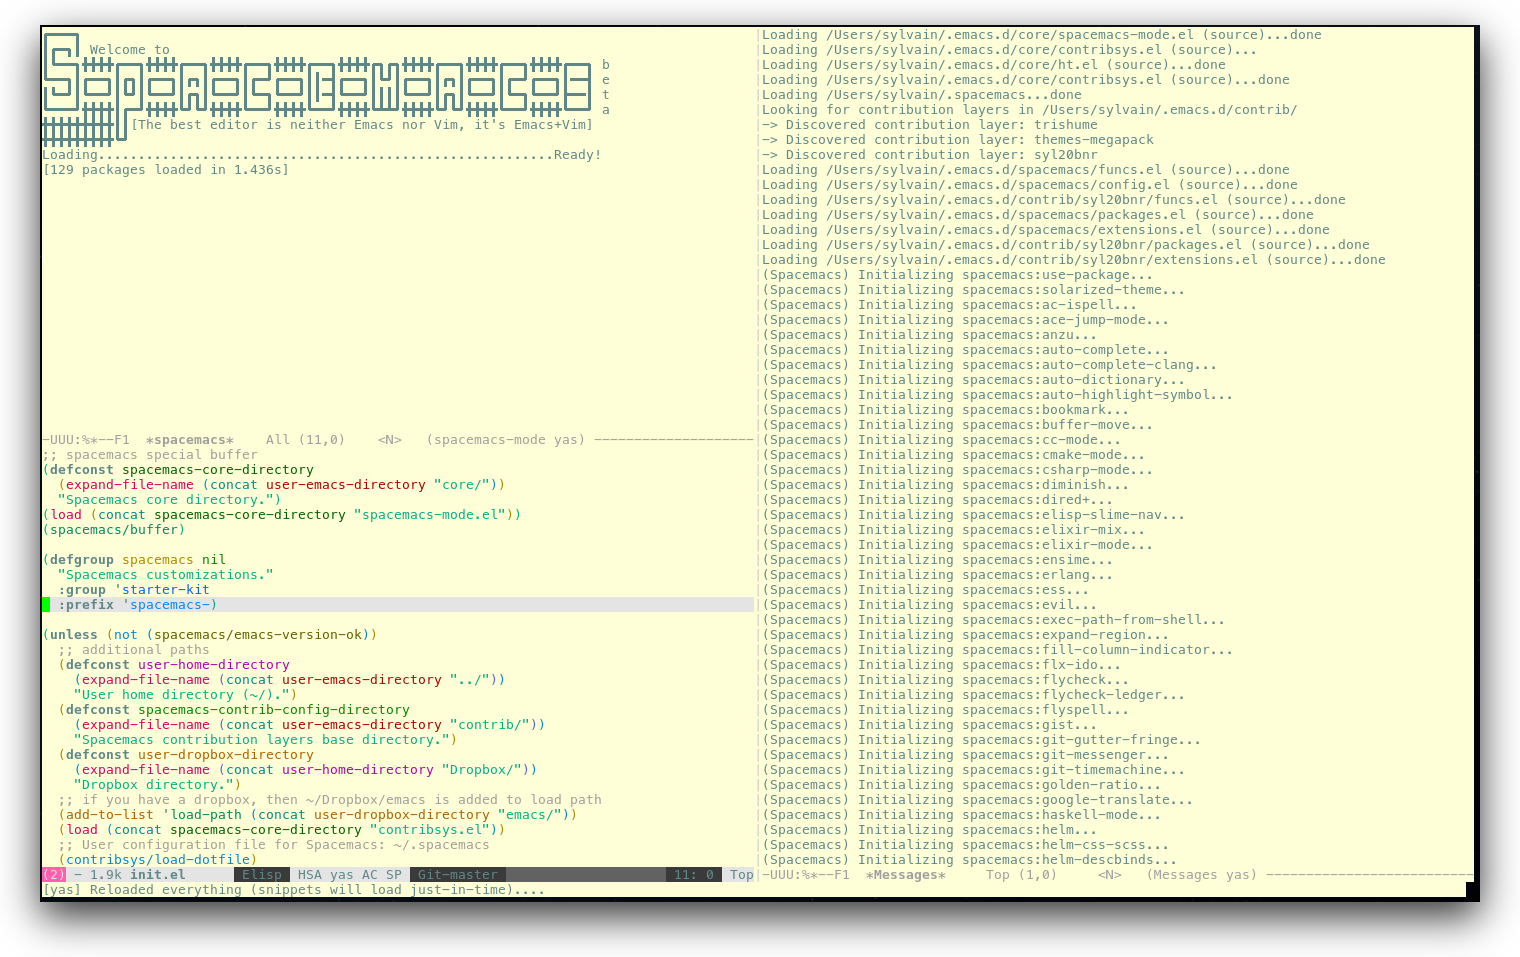 /TakeV/spacemacs/media/commit/34e7454d1190b61bad41c311b63bfb68716a8079/doc/img/spacemacs-urxvt.png